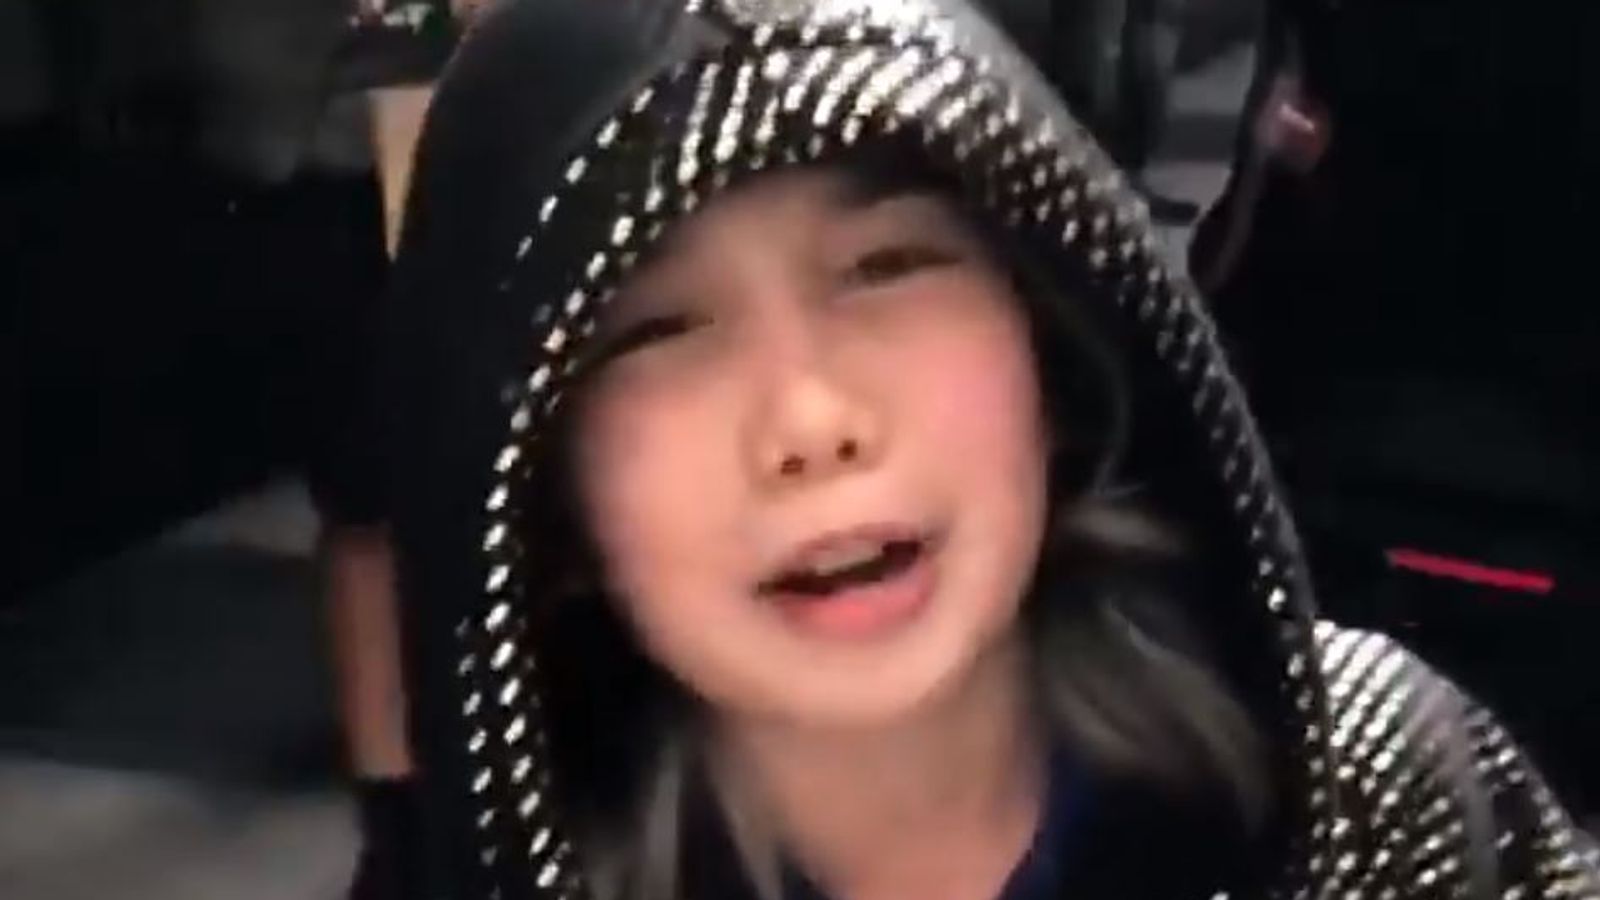 Child rapper says she and brother are alive after Instagram statement